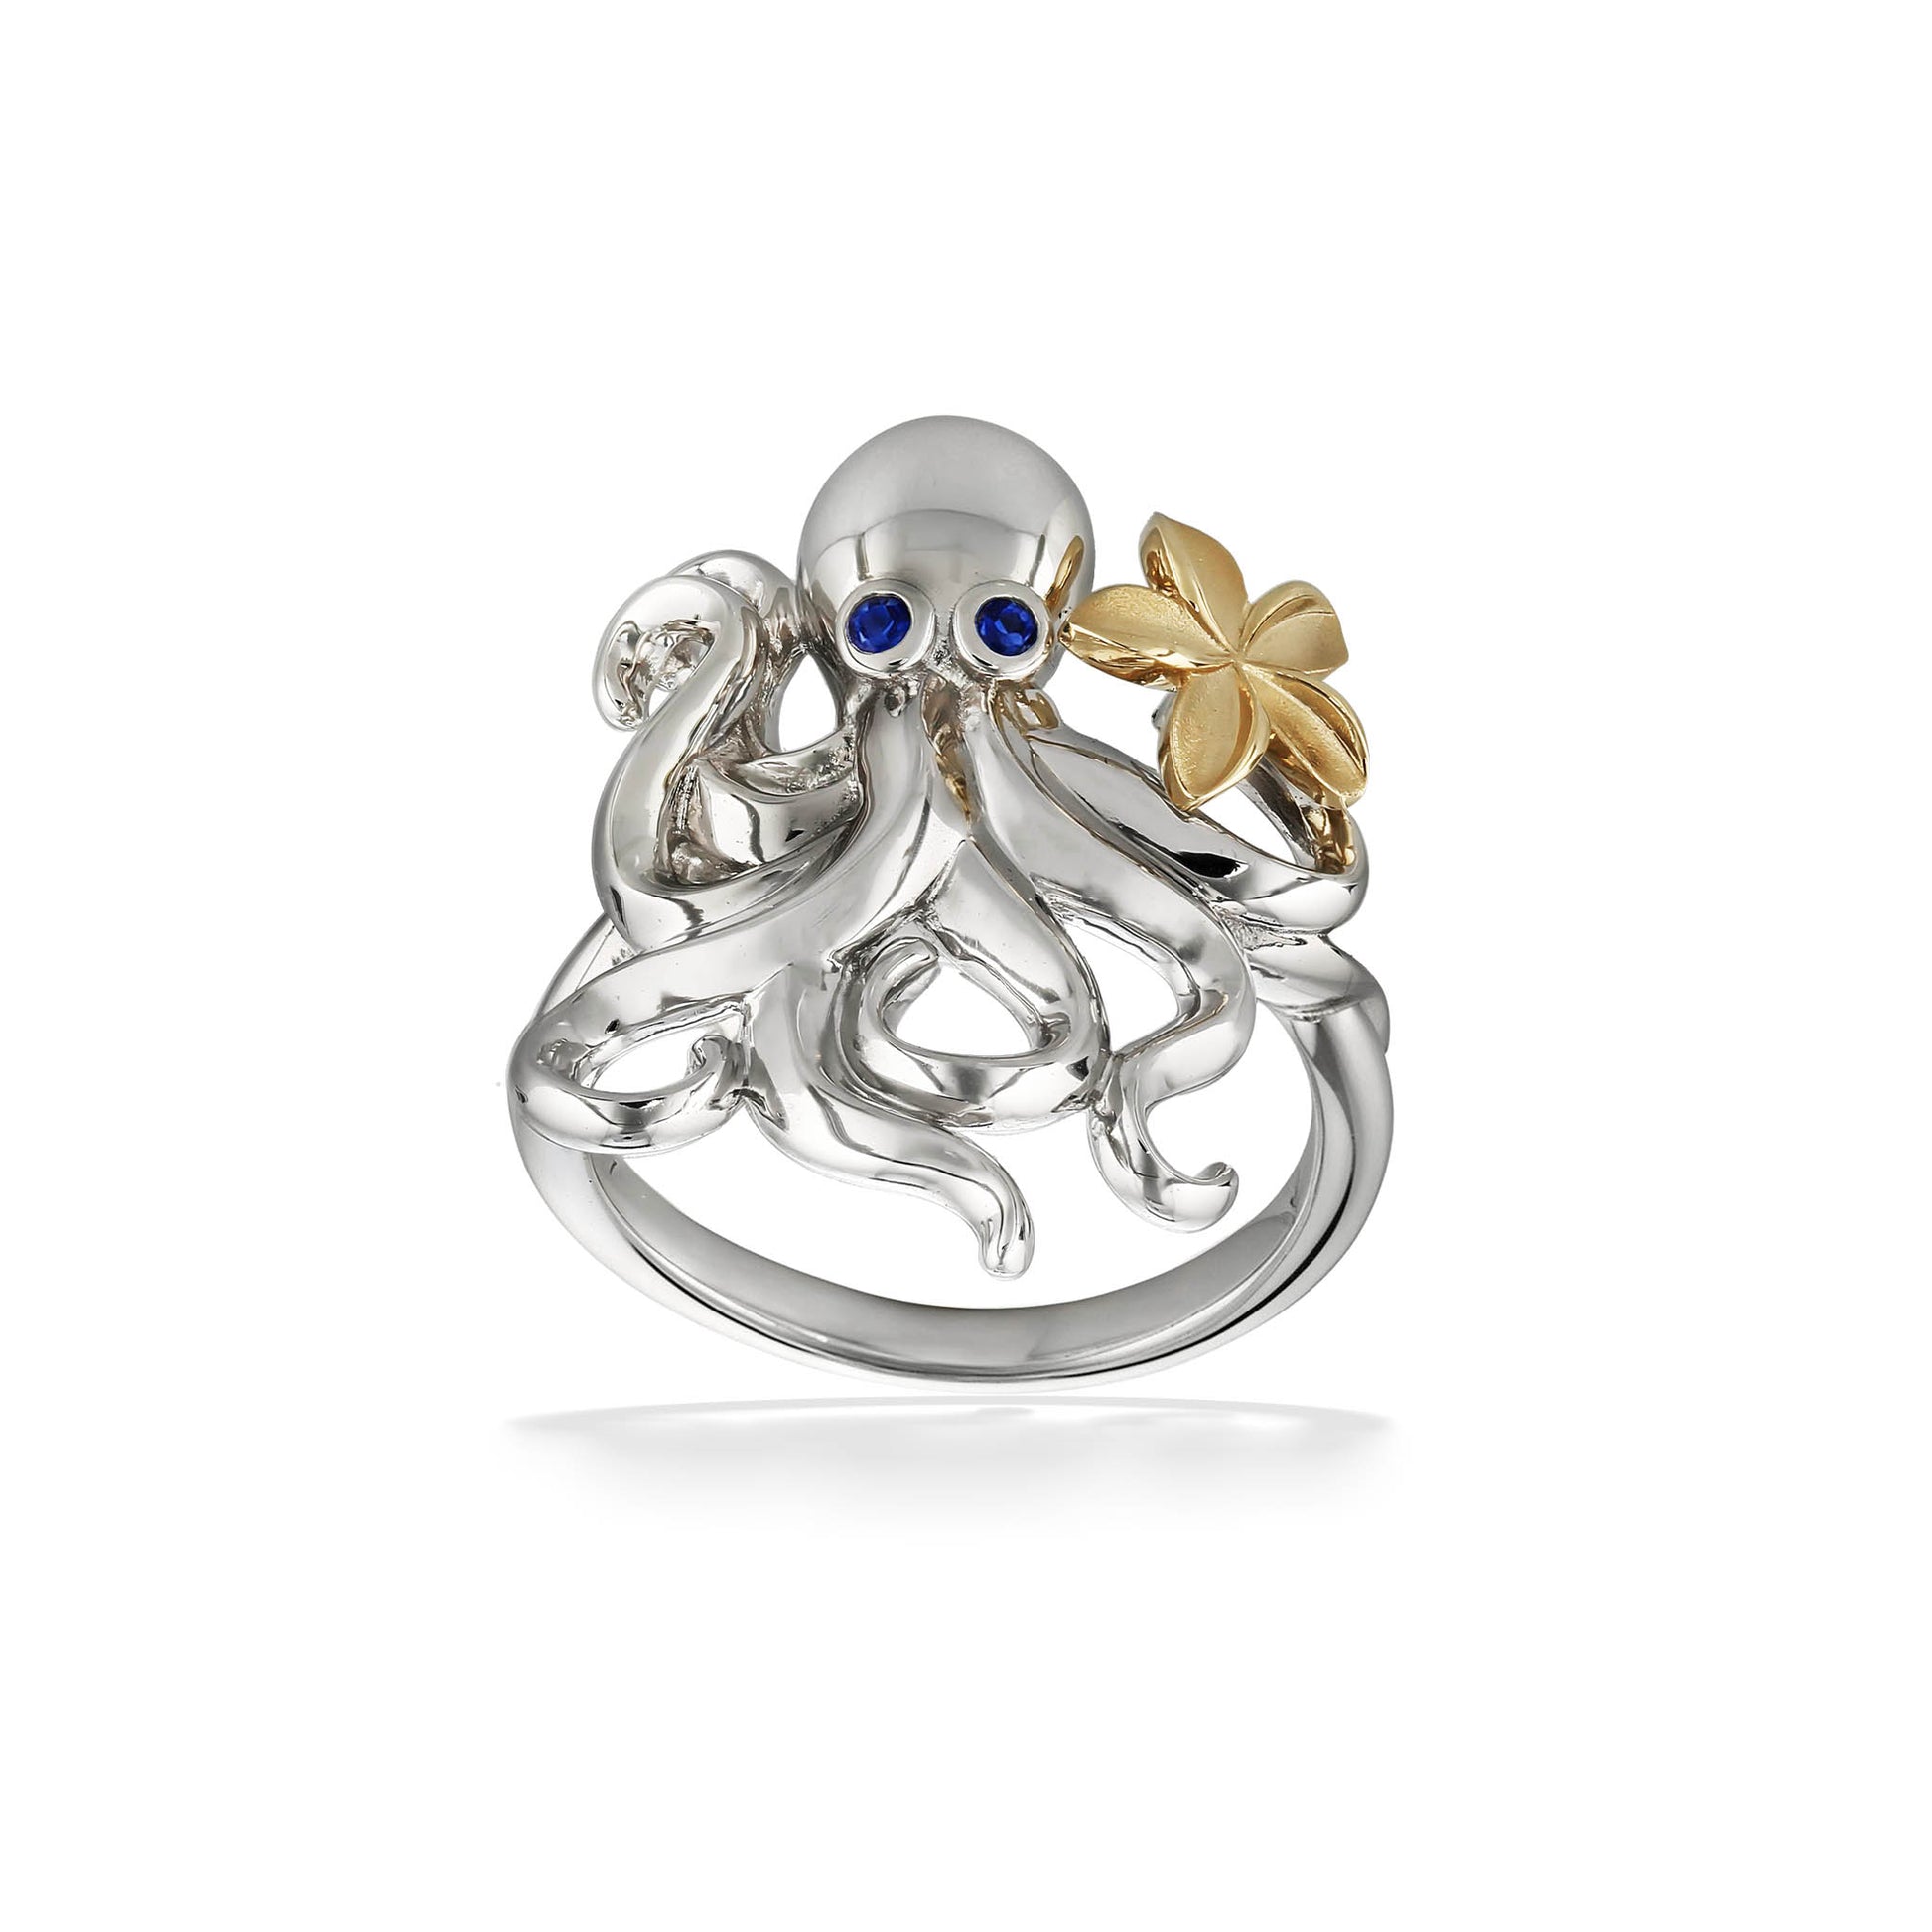 44736 - 14K Yellow Gold and Sterling Silver - Octopus and Plumeria Ring